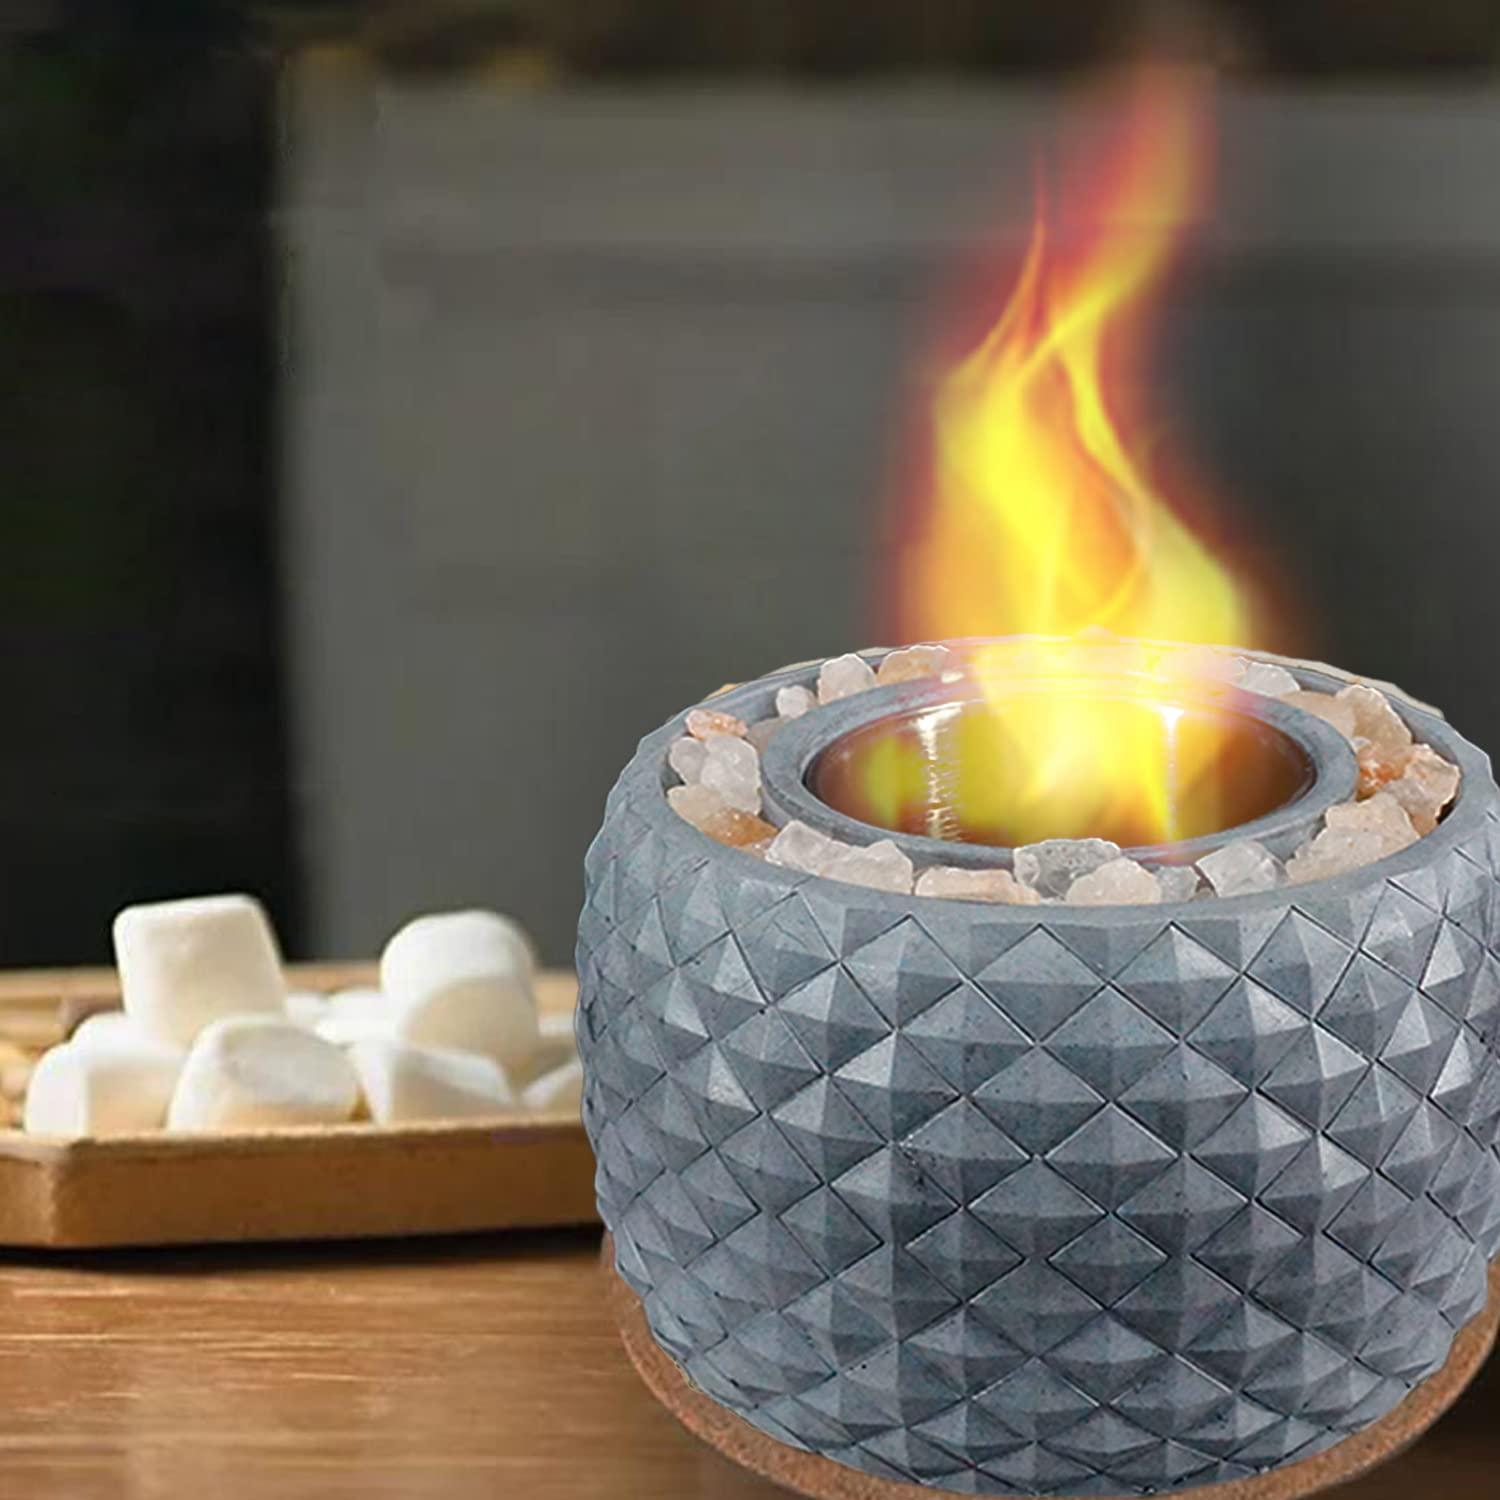 Koncenttop Tabletop Fire Pit Indoor,Tabletop Fireplace Concrete, Pineapple Shape Small Fire Bowl, firebowl Table top, Portable Tabletop Fire Pit (Gray) - CookCave